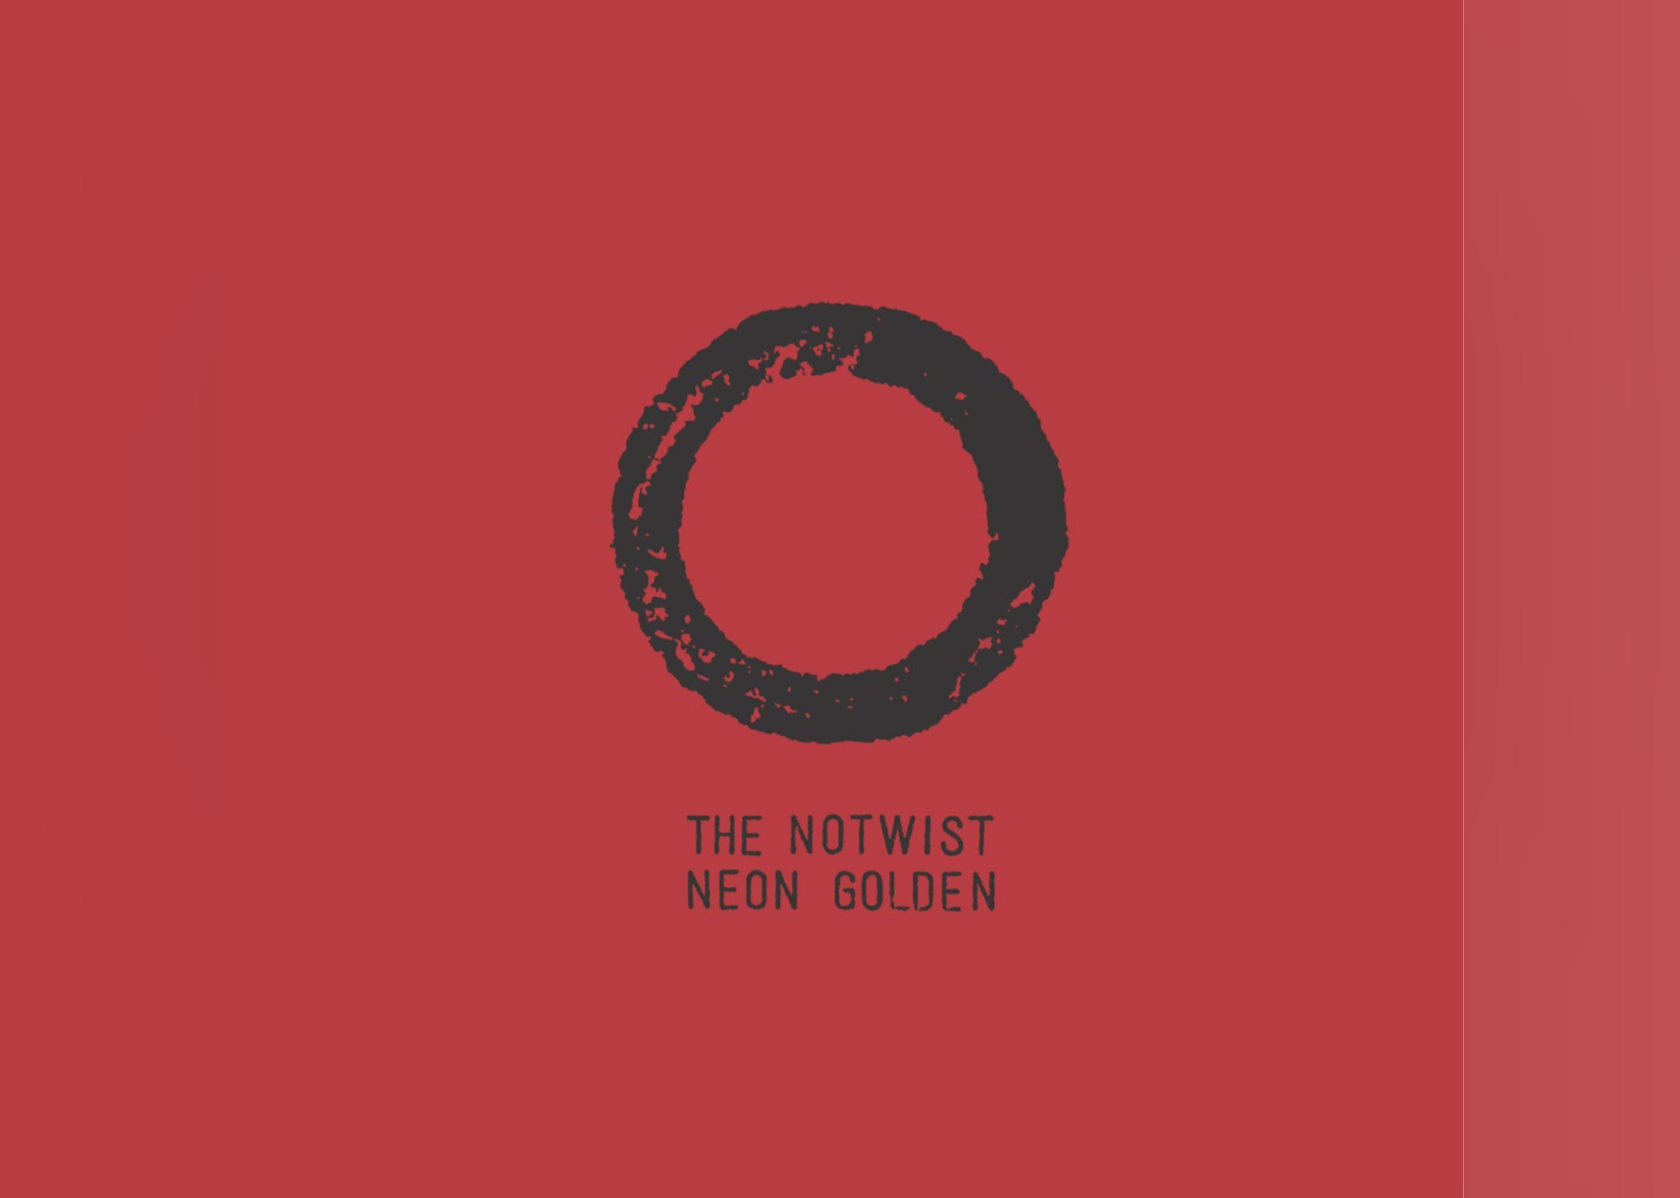 The name of the Album on a red background with a black circle in the middle.